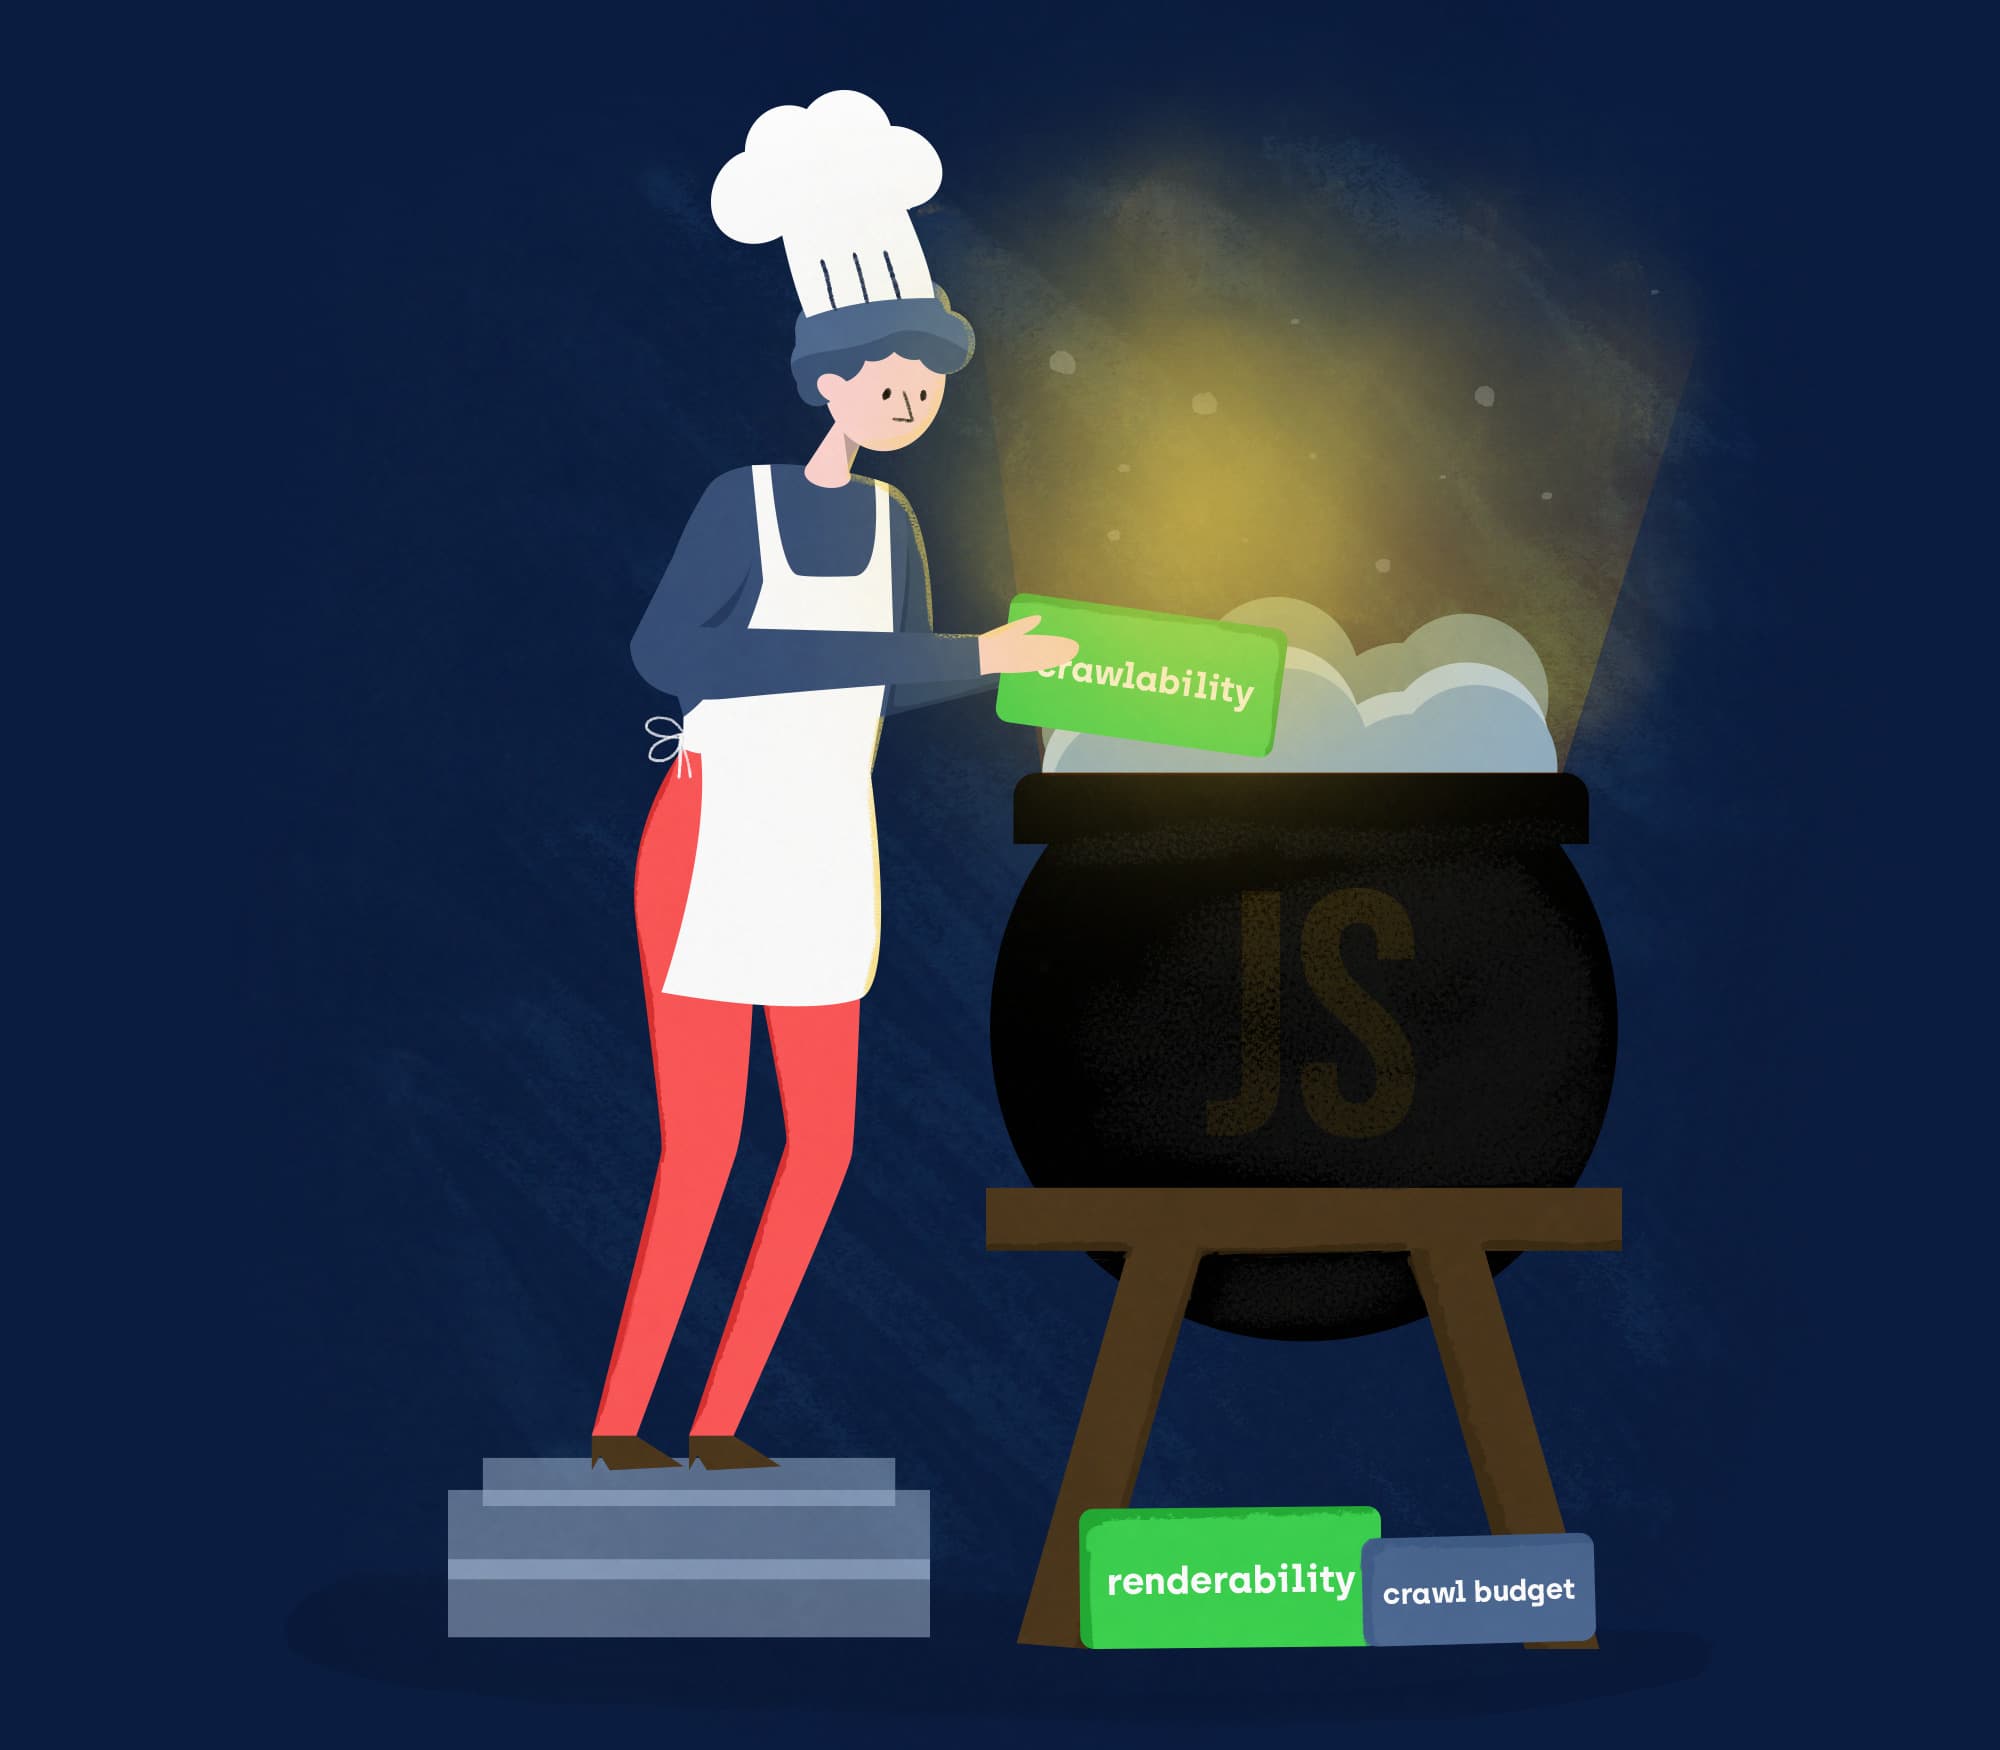 A cook adds a 'crawlability' ingredient to a kettle signed with JavaScript abbreviation.